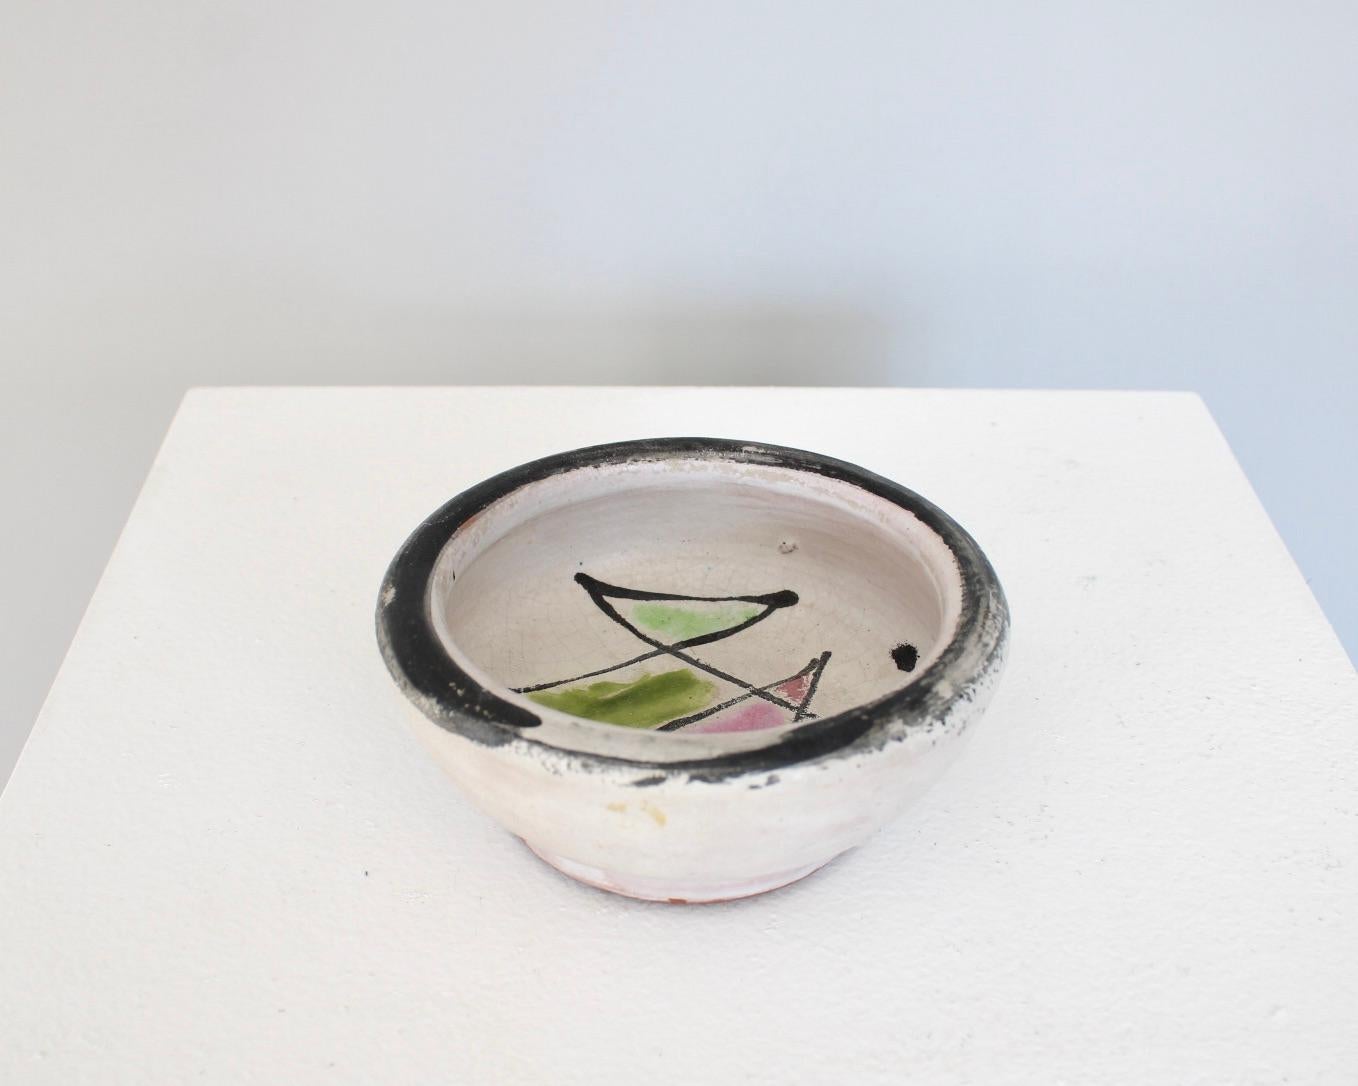 Georges Jouve French ceramic artist small dish with pink and green interior glaze. Black brushstroke on the rim. Signed with Jouve cypher. 
Excellent condition, no ships or restorations. 

 5.75w” x 3.5h